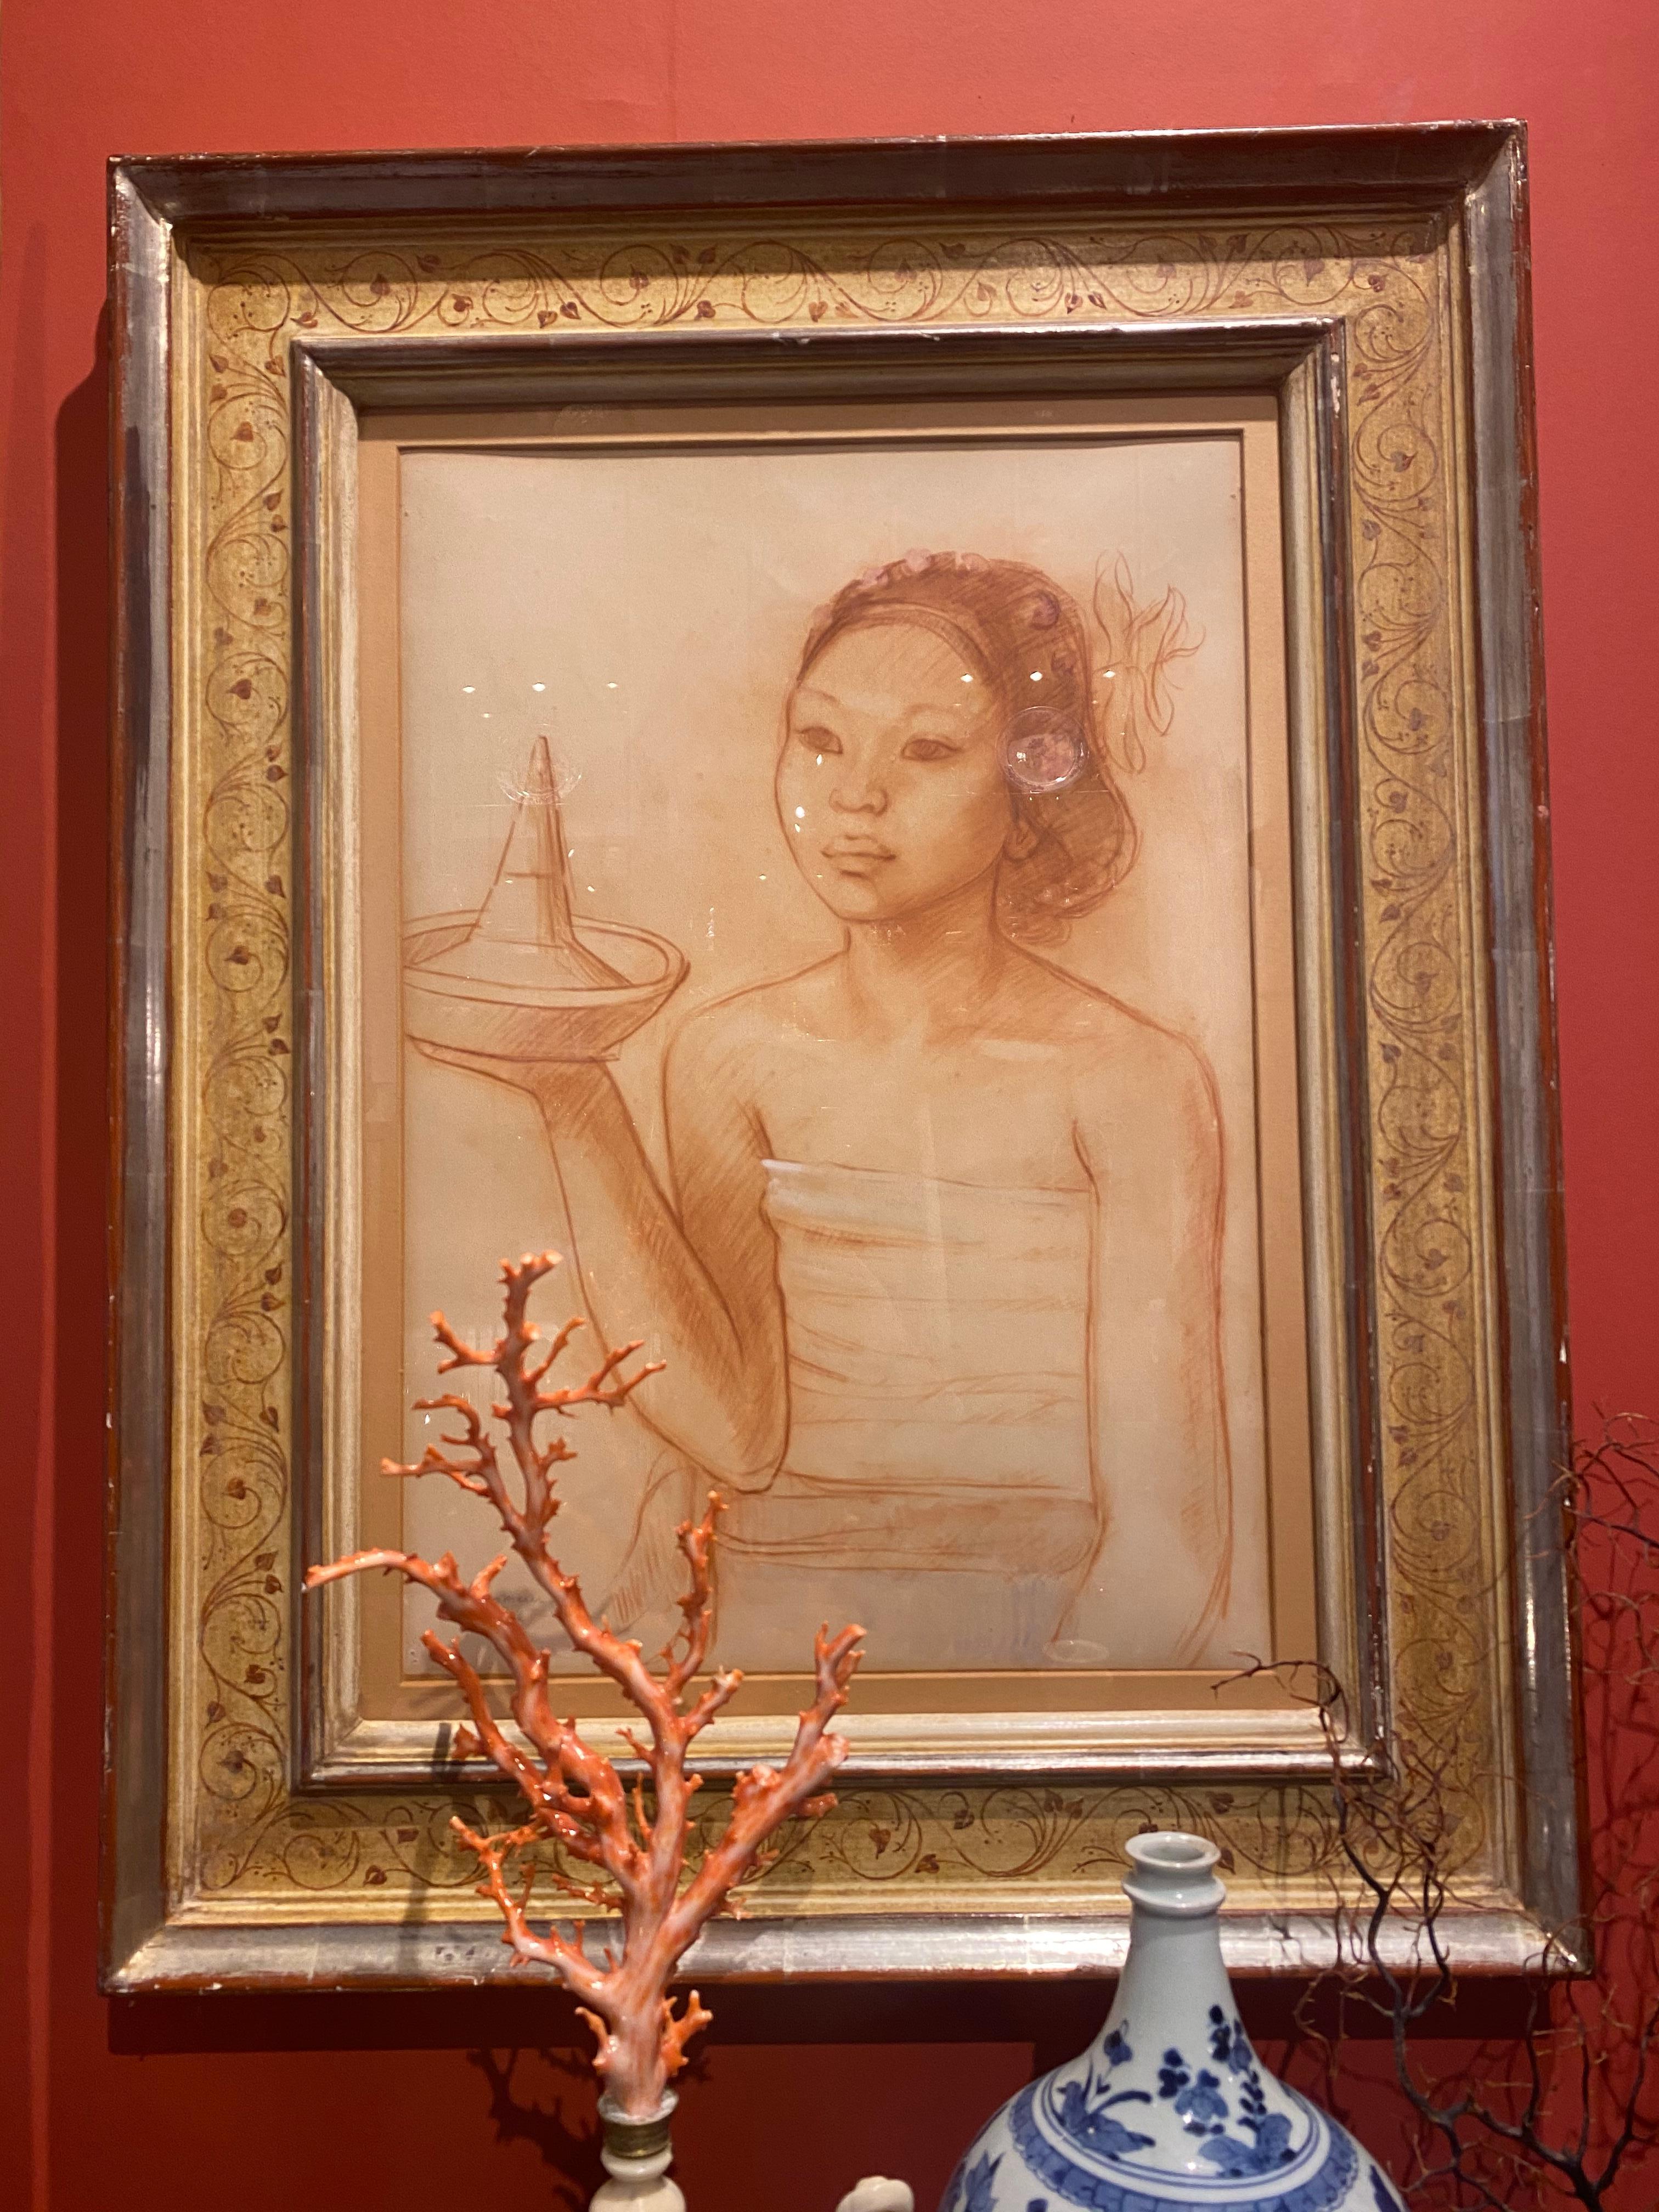 Theo Meier (1908-1982)

“A Balinese woman with offerings”

Signed, dated '36 and annotated Mankok (the name of the sitter) lower left

Sanguine on paper, measures: 57 x 41.5 cm
 

In a handmade and hand painted frame with address: Max Kno¨ll,